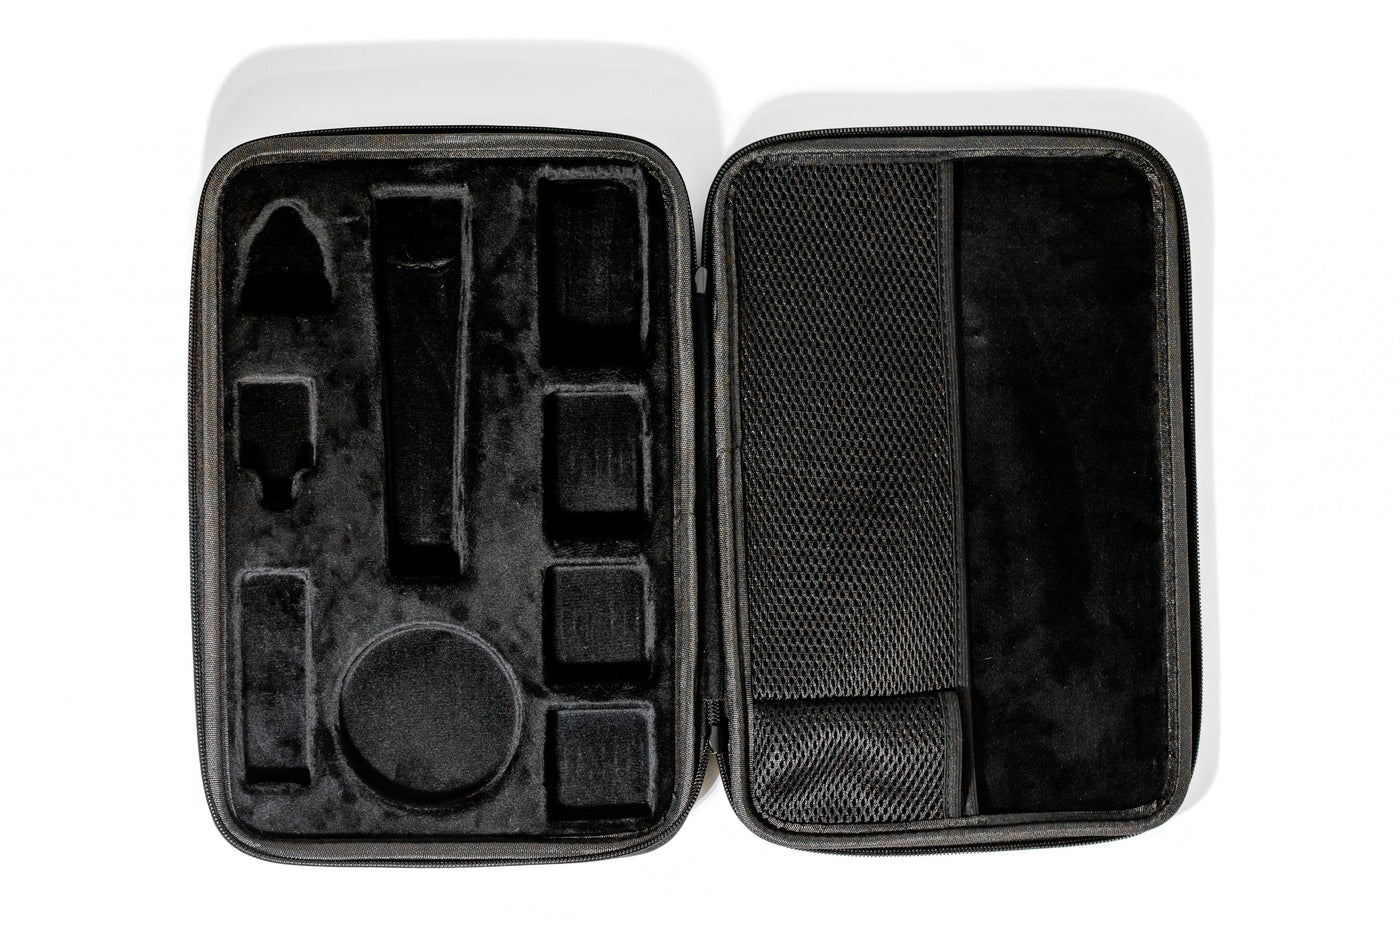 Trimmer Cases by Brio Product Group